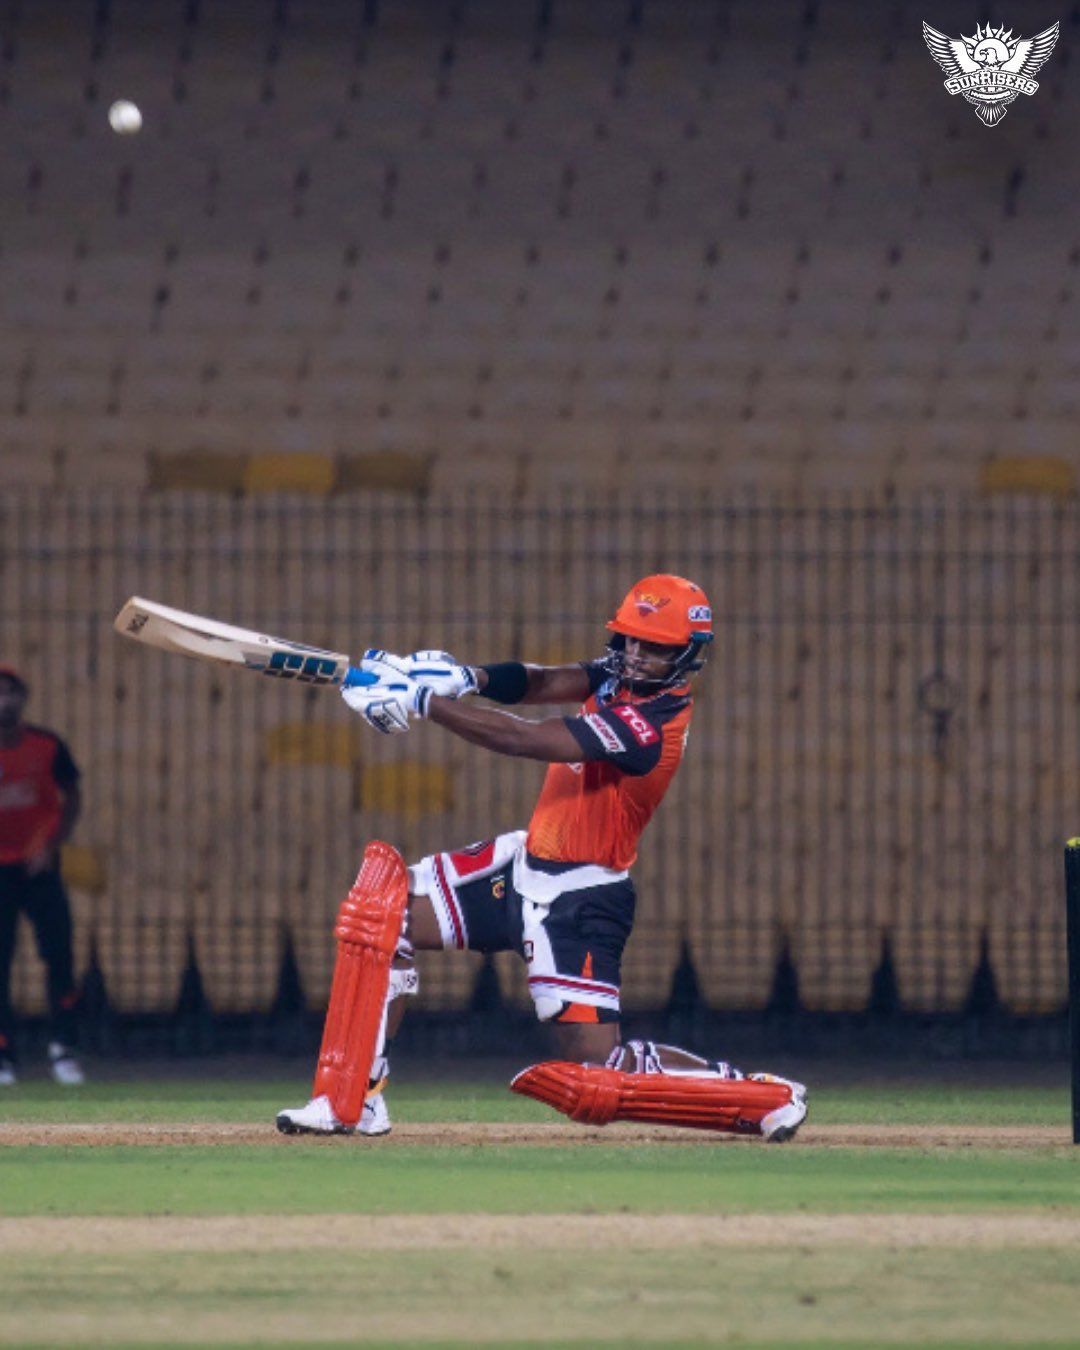 Nicholas Pooran unleashes some big hits in the training (Credit: Twitter/Sunrisers Hyderabad)